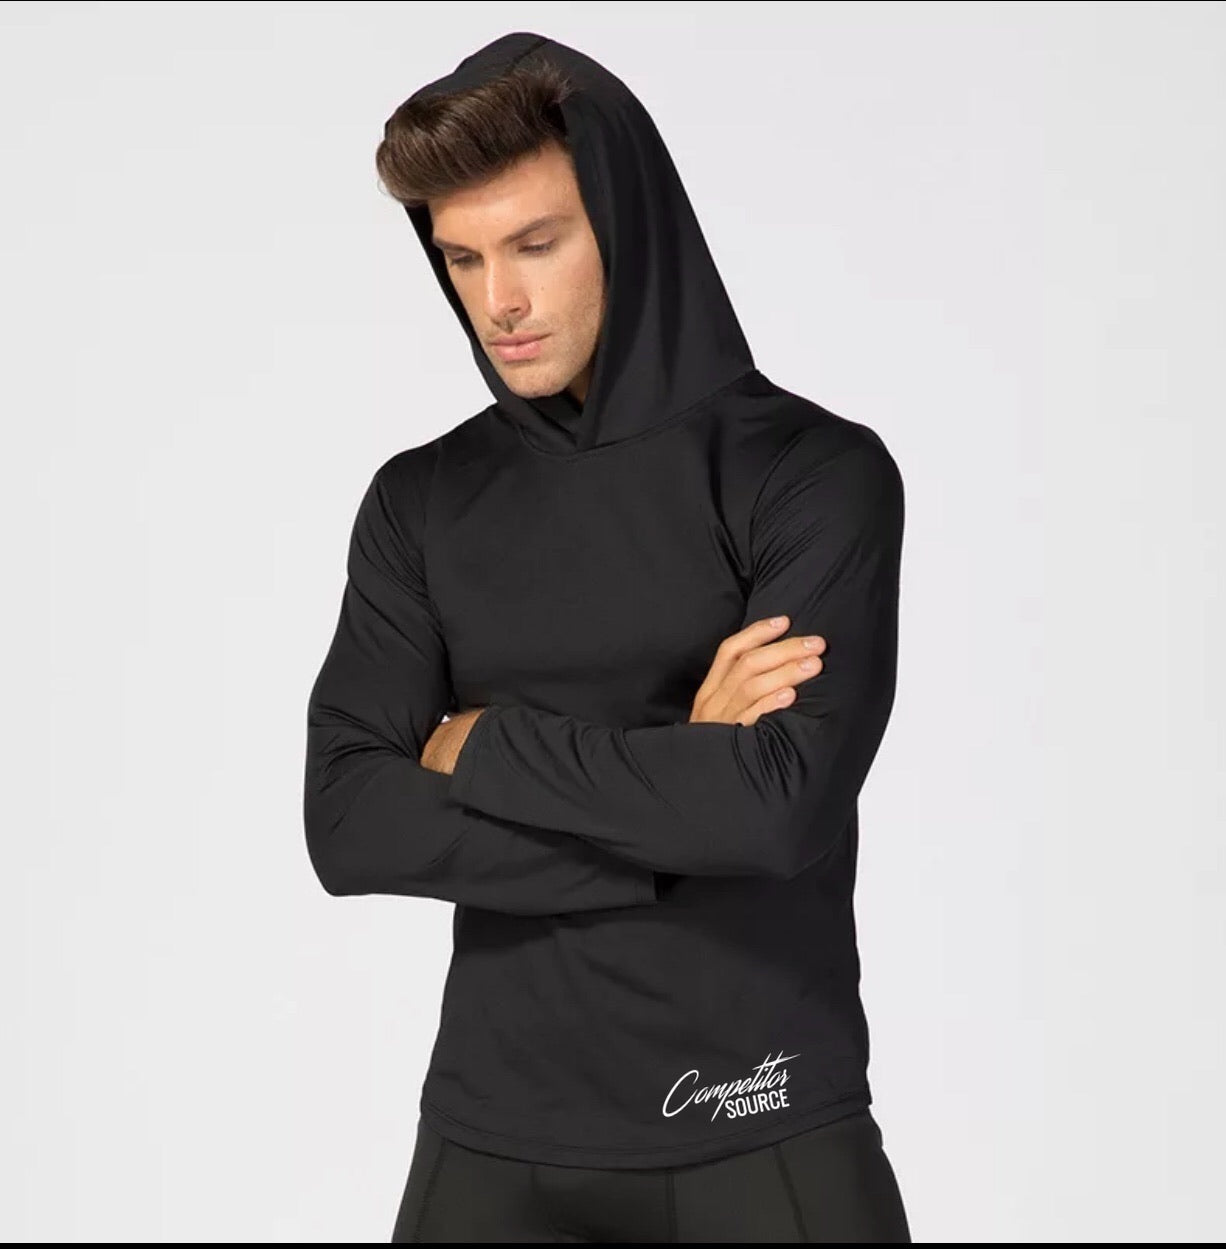 Light Weight Fall Workout Hoodie - Competitor Source